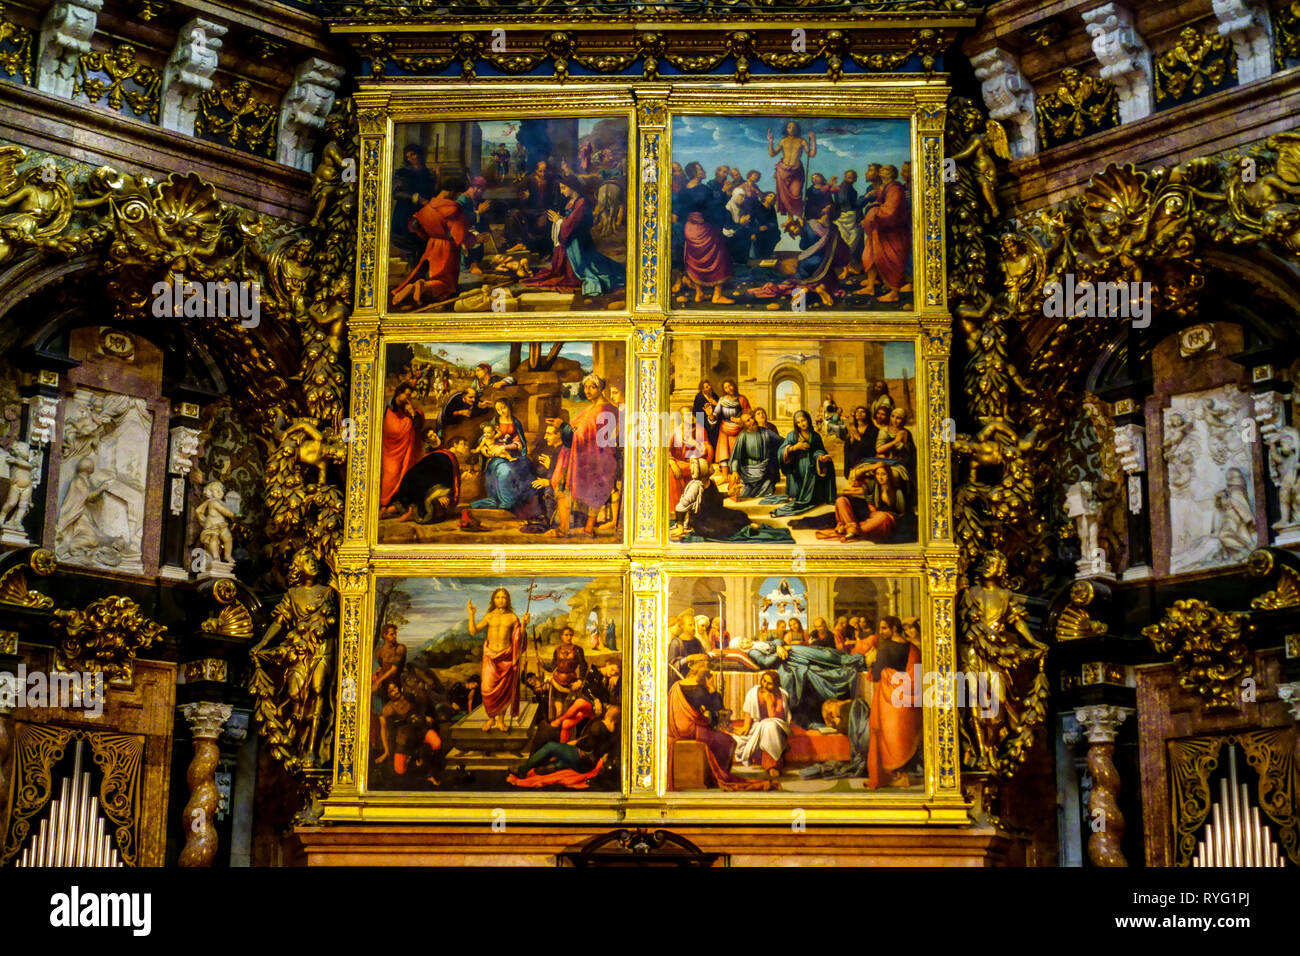 Valencia Spain Cathedral altarpiece painting Valencia Cathedral Interior Main Altar Middle Ages Gothic Art Stock Photo